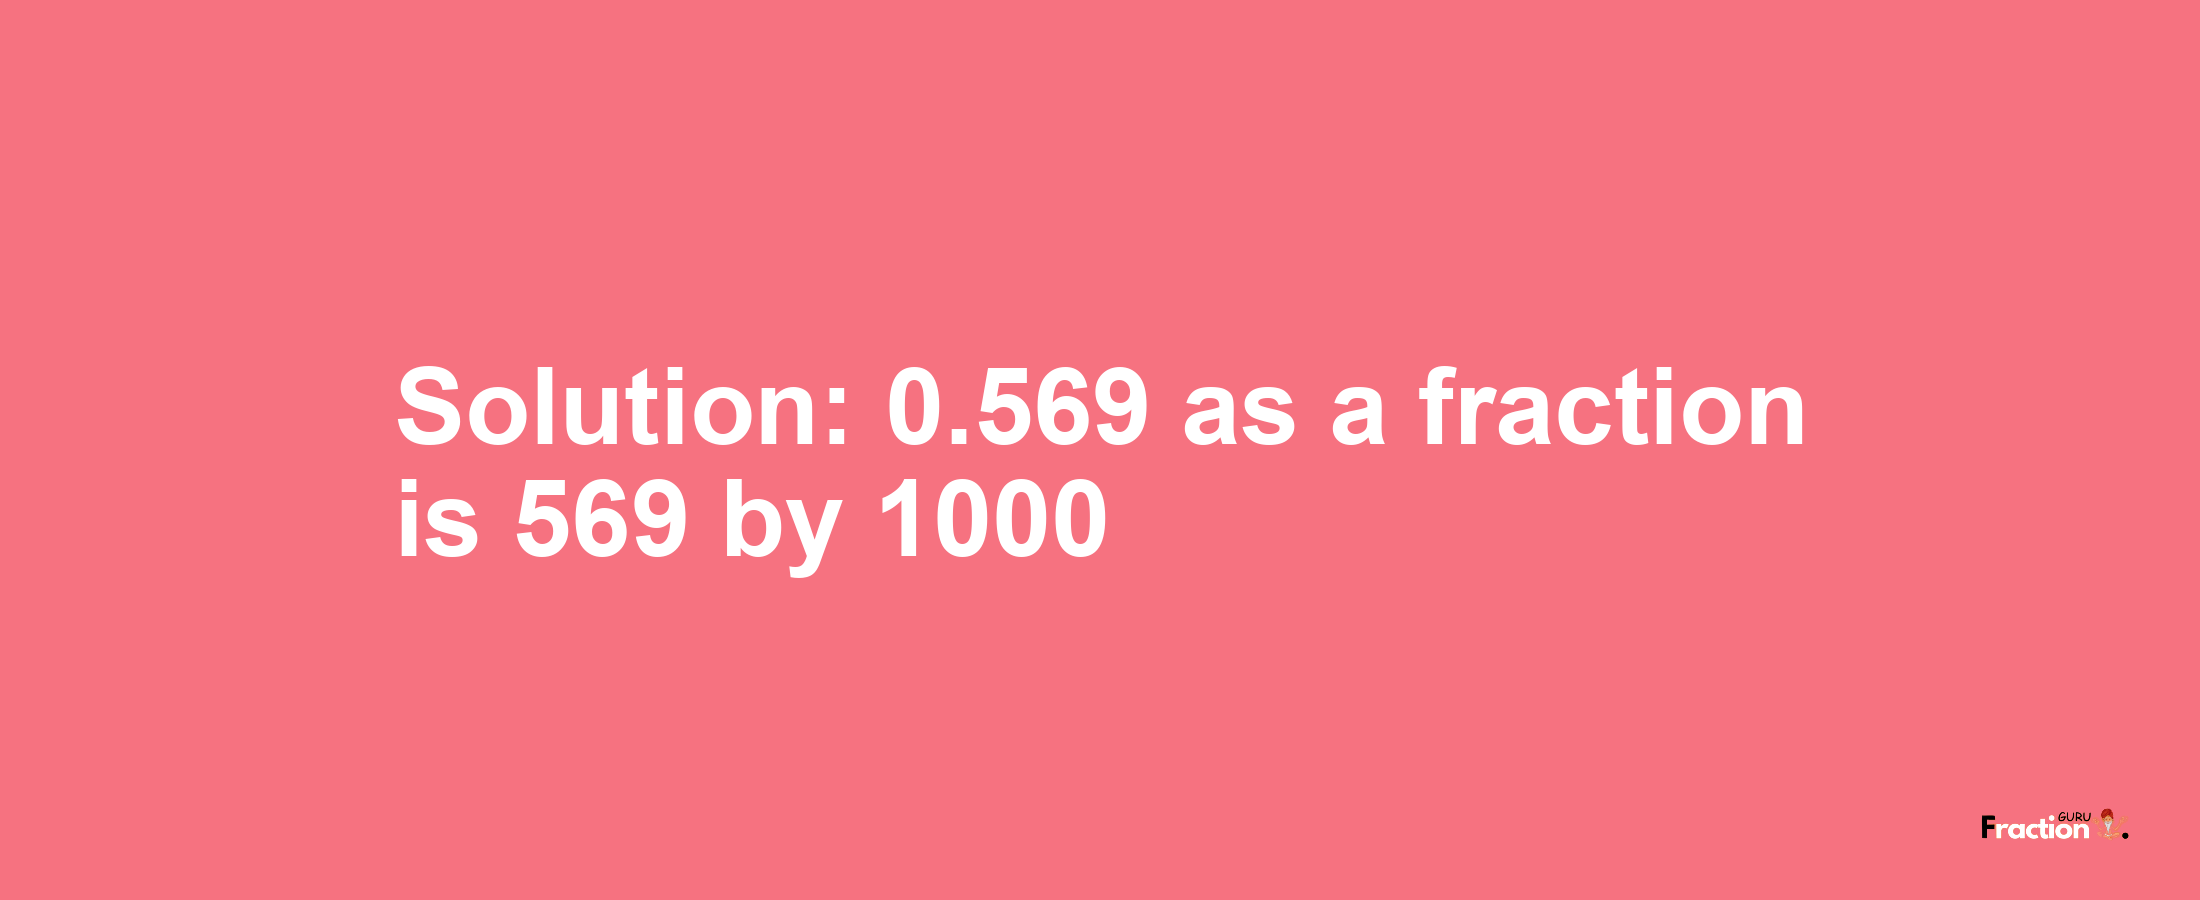 Solution:0.569 as a fraction is 569/1000